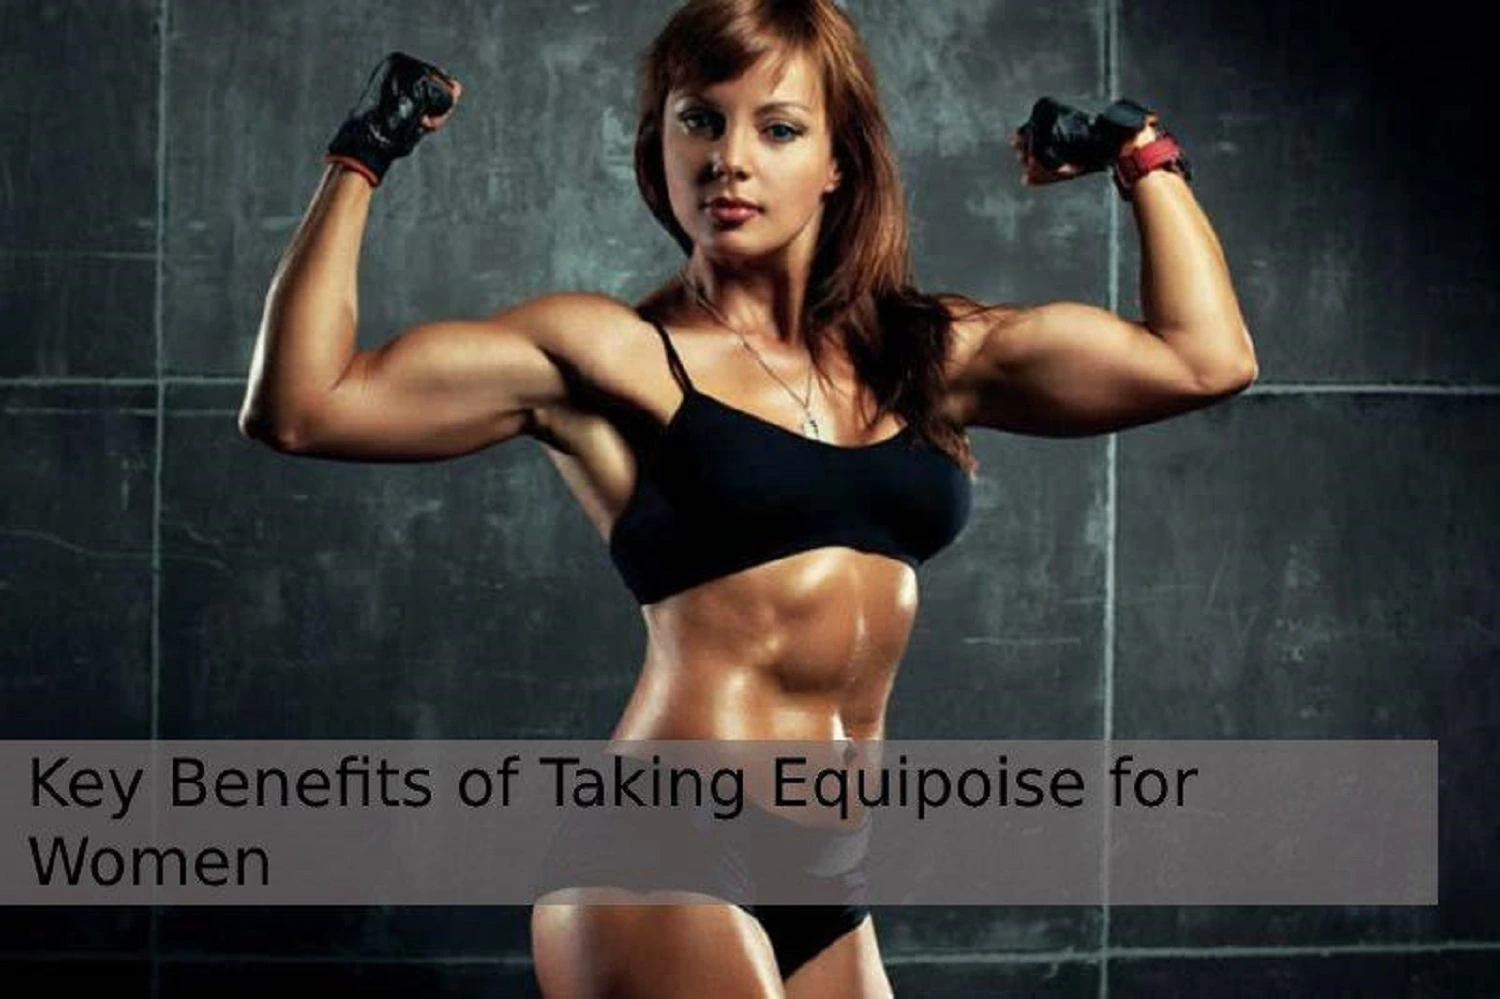 Benefits of Equipoise for women